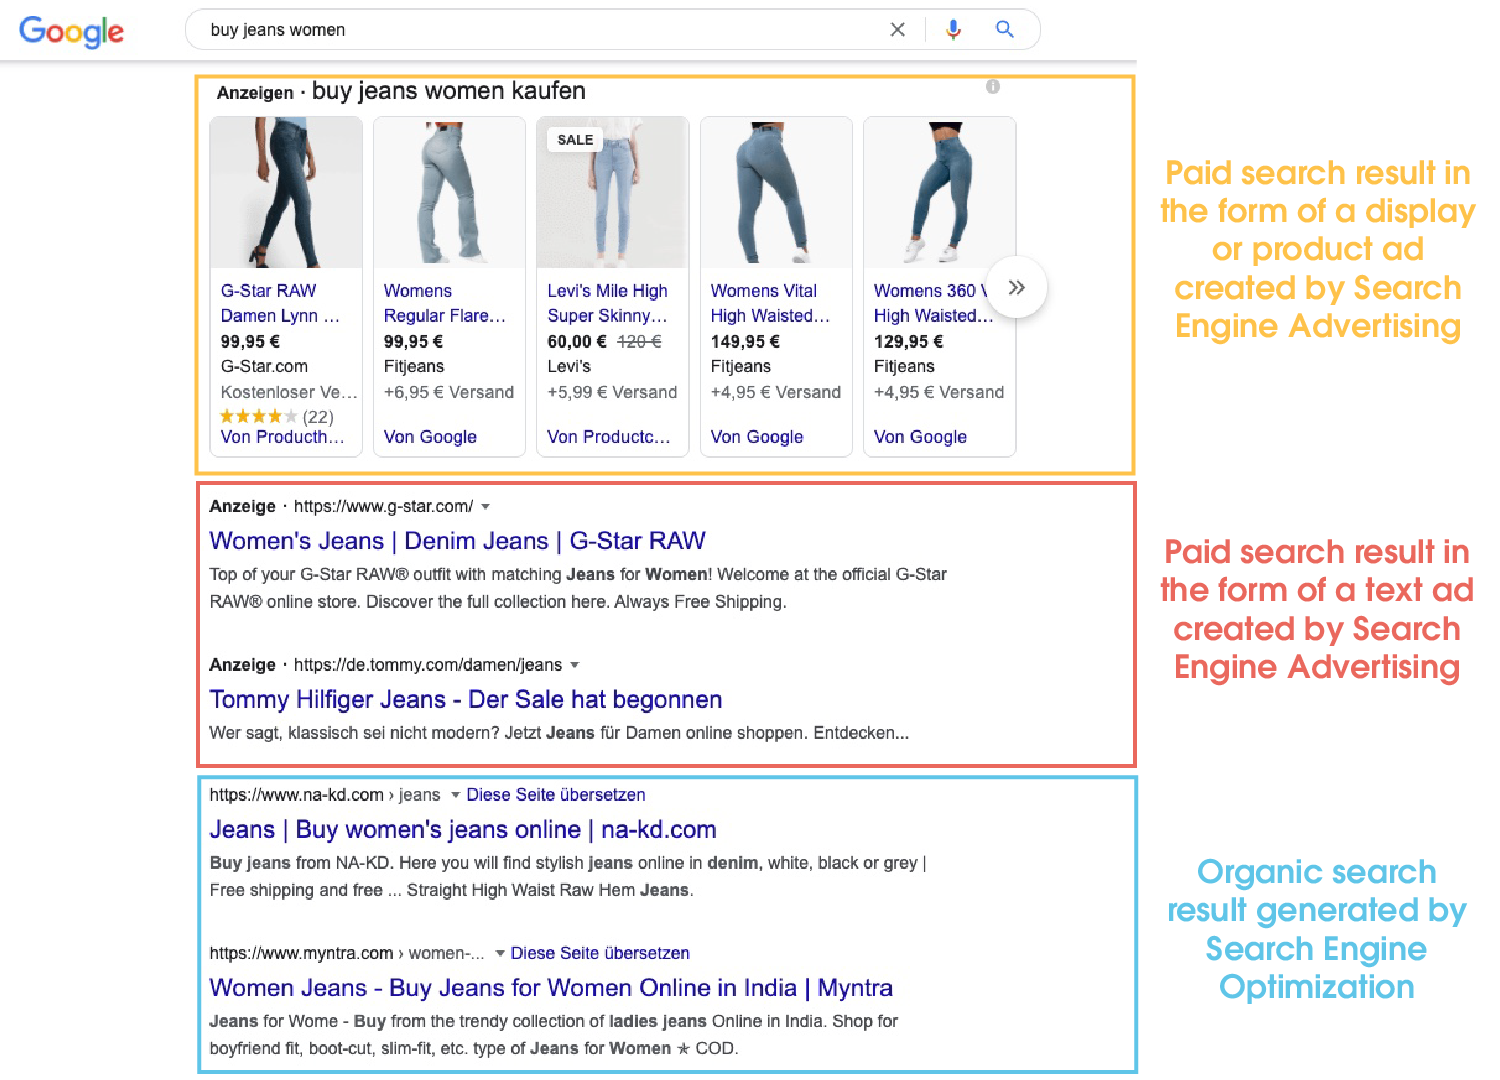 The image shows a screenshot of the Google search for the keyword "buy jeans pants ladies". Here, both text (marked in red) and product ads (marked in orange) are displayed, which are shown above or next to the organic search results (marked in blue).